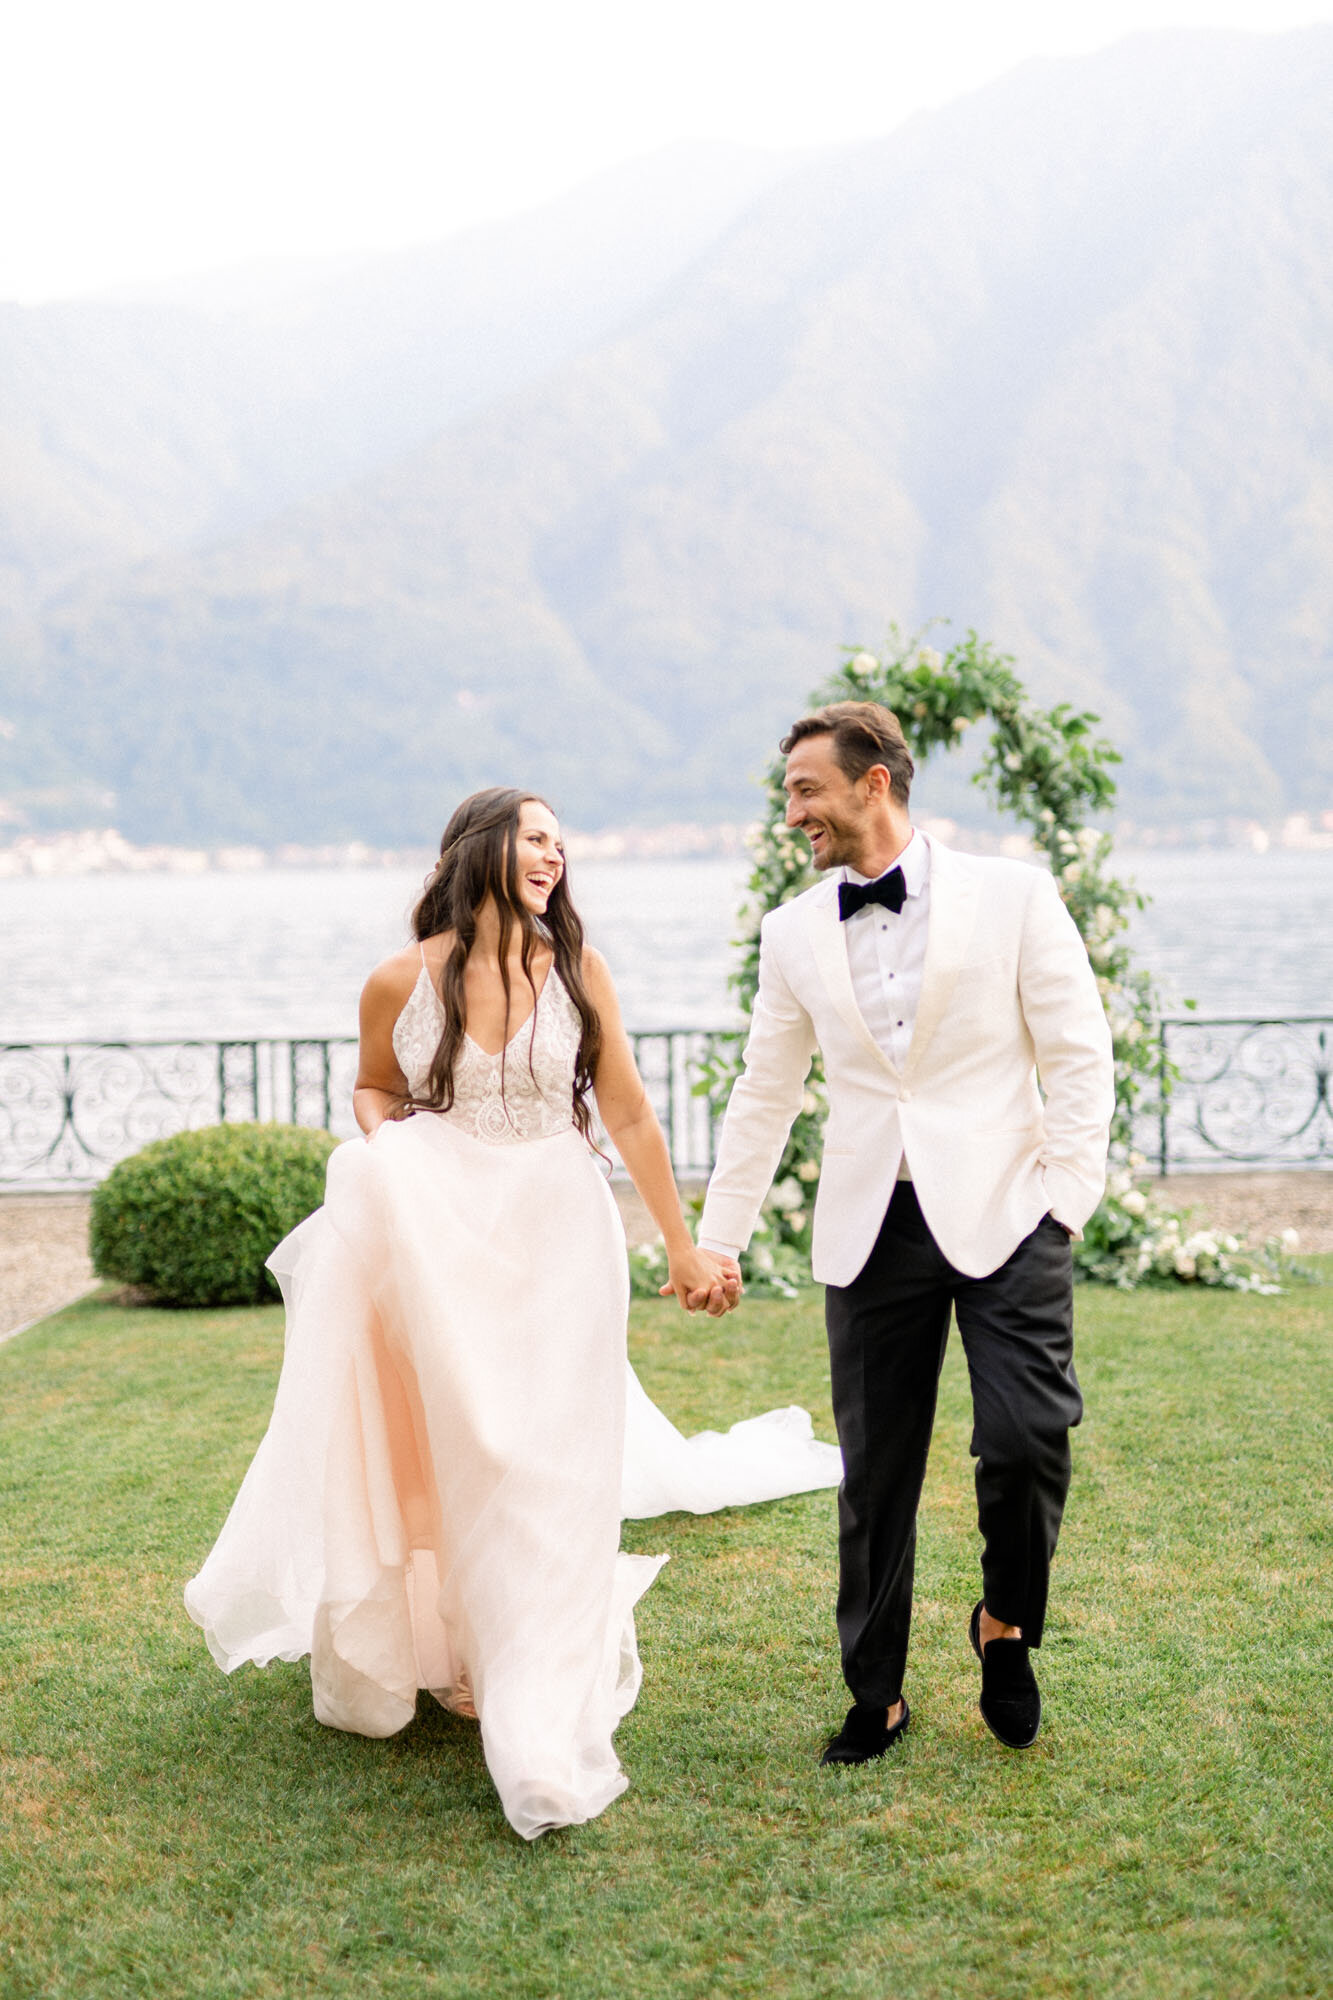  Custom Blush gown by  Silvia Valli  in Lake Como, Italy 